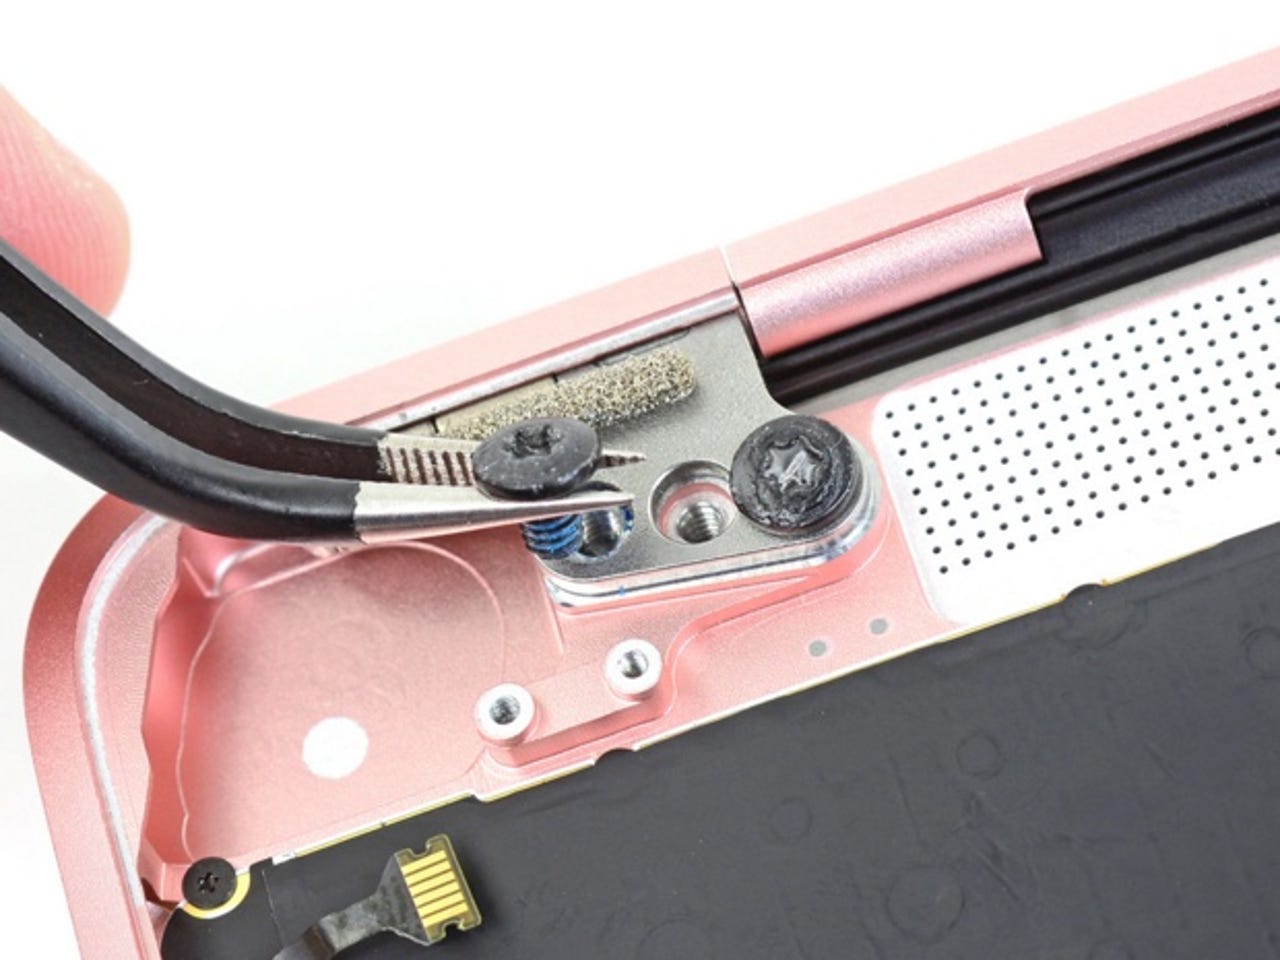 Apple's new MacBook knows if you've been fiddling inside it